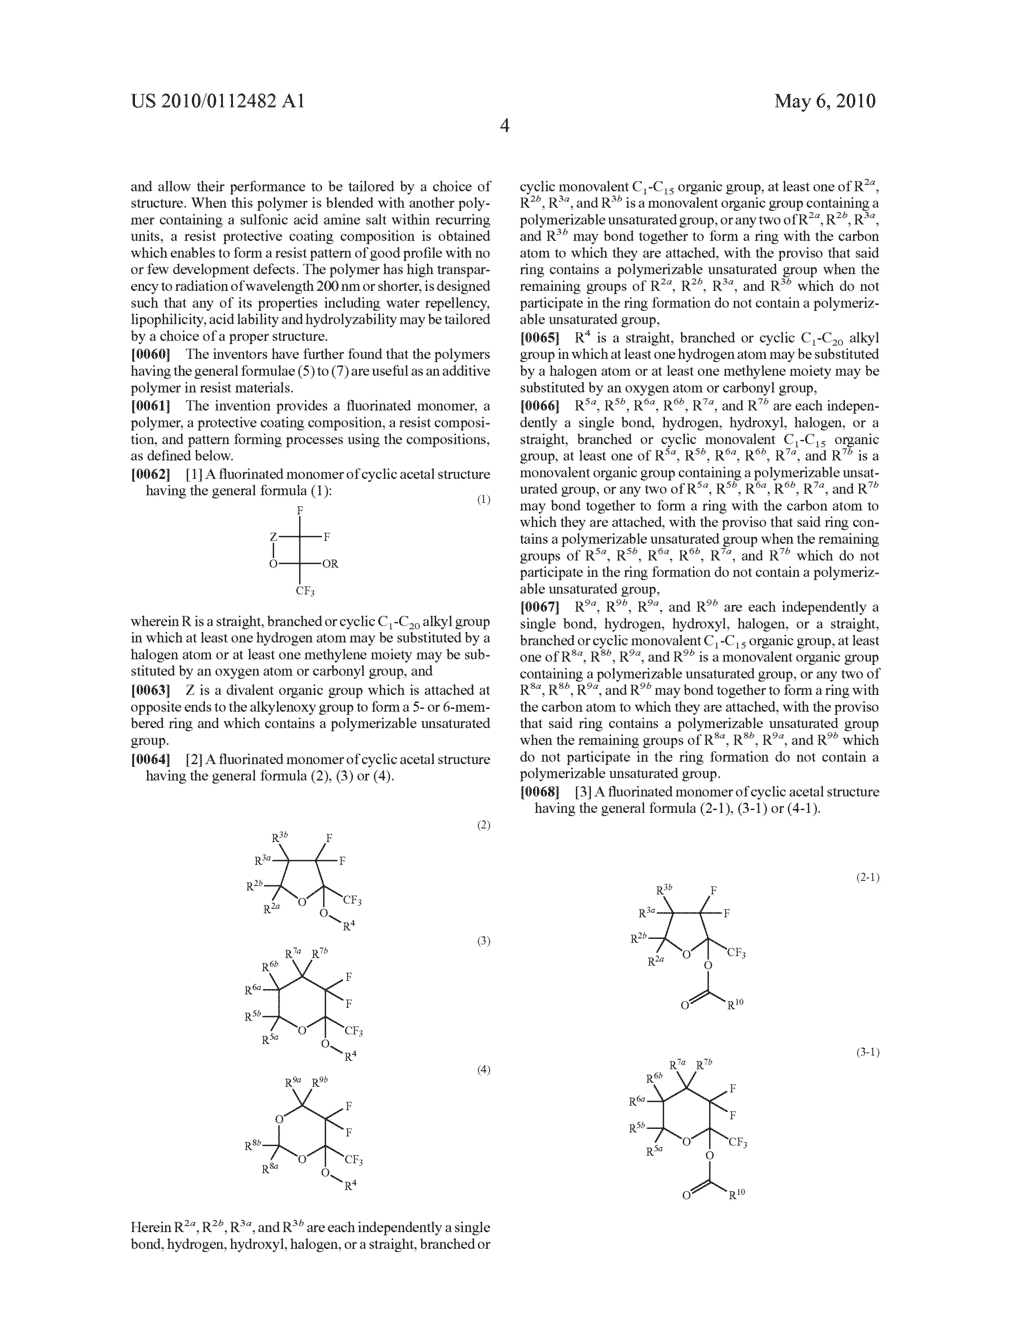 FLUORINATED MONOMER OF CYCLIC ACETAL STRUCTURE, POLYMER, RESIST PROTECTIVE COATING COMPOSITION, RESIST COMPOSITION, AND PATTERNING PROCESS - diagram, schematic, and image 05